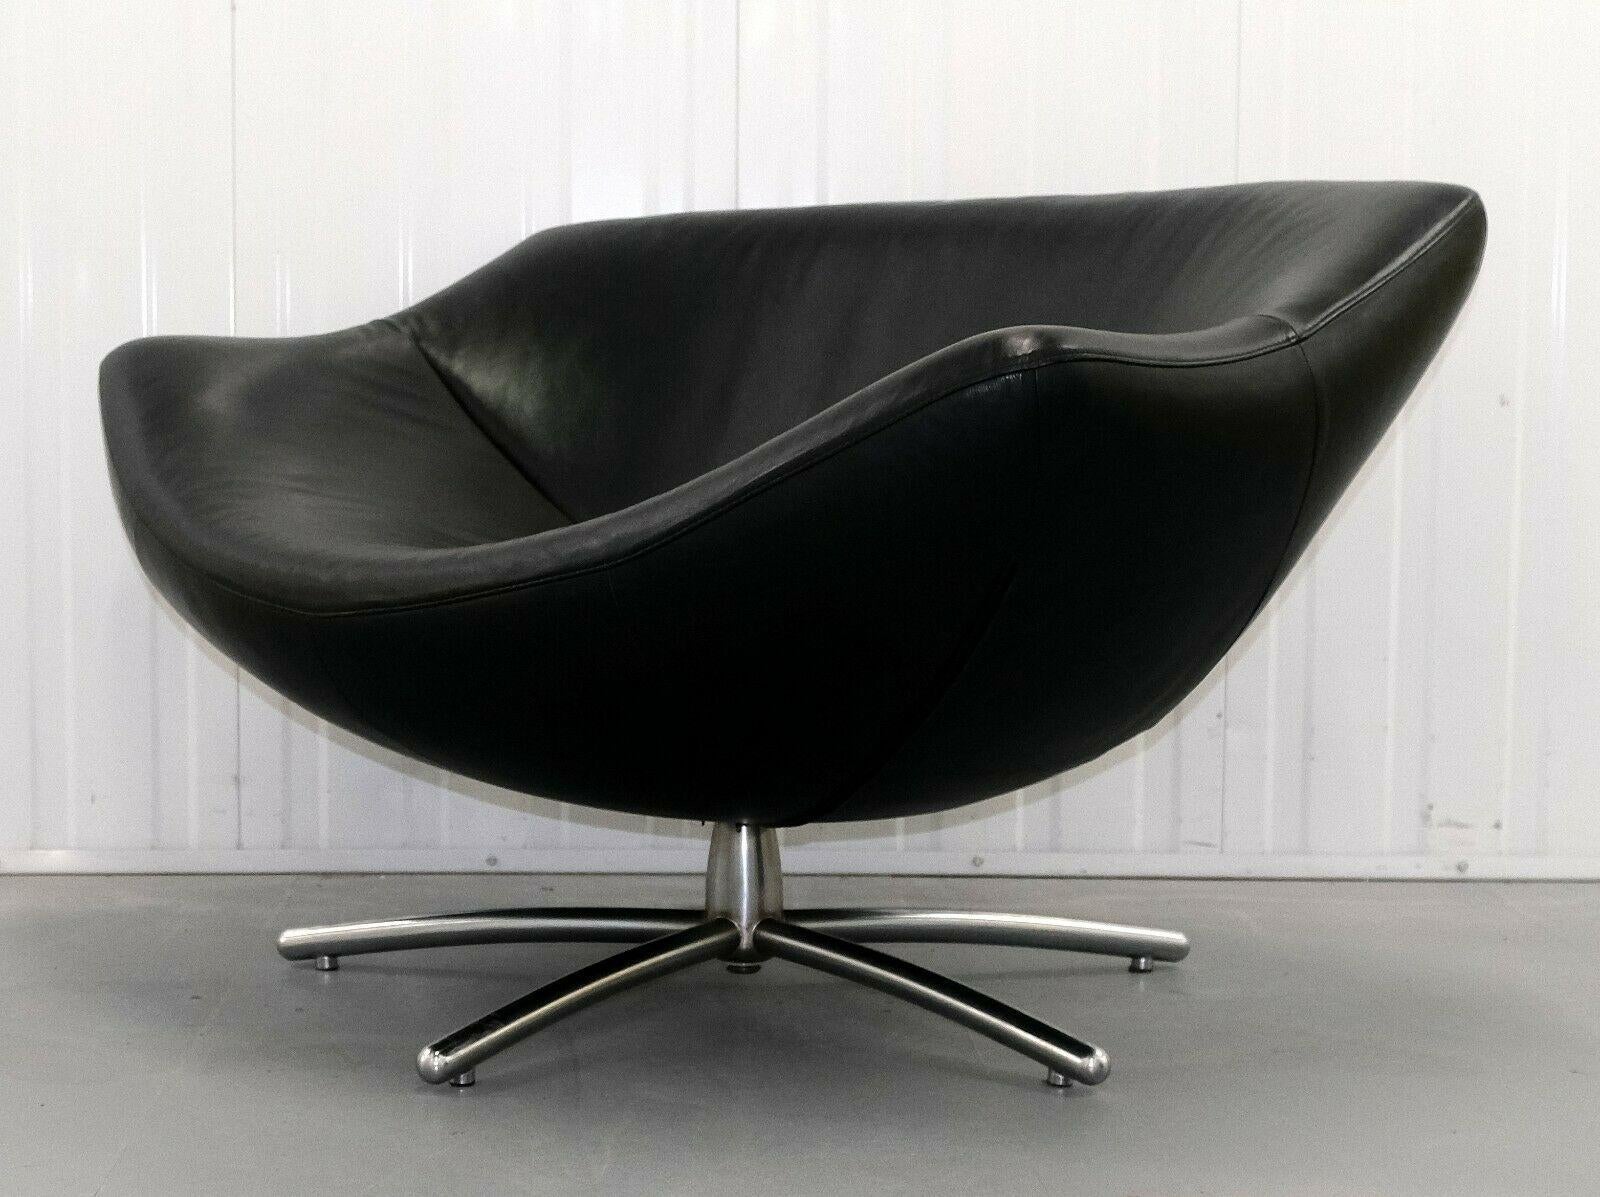 We are delighted to offer for sale this stunning Heals Gerard Van Den Berg black leather swivel armchair. 

This comfortable and stylish egg shape armchair will compliment any room as the design is simple yet eye catching. The soft leather (which